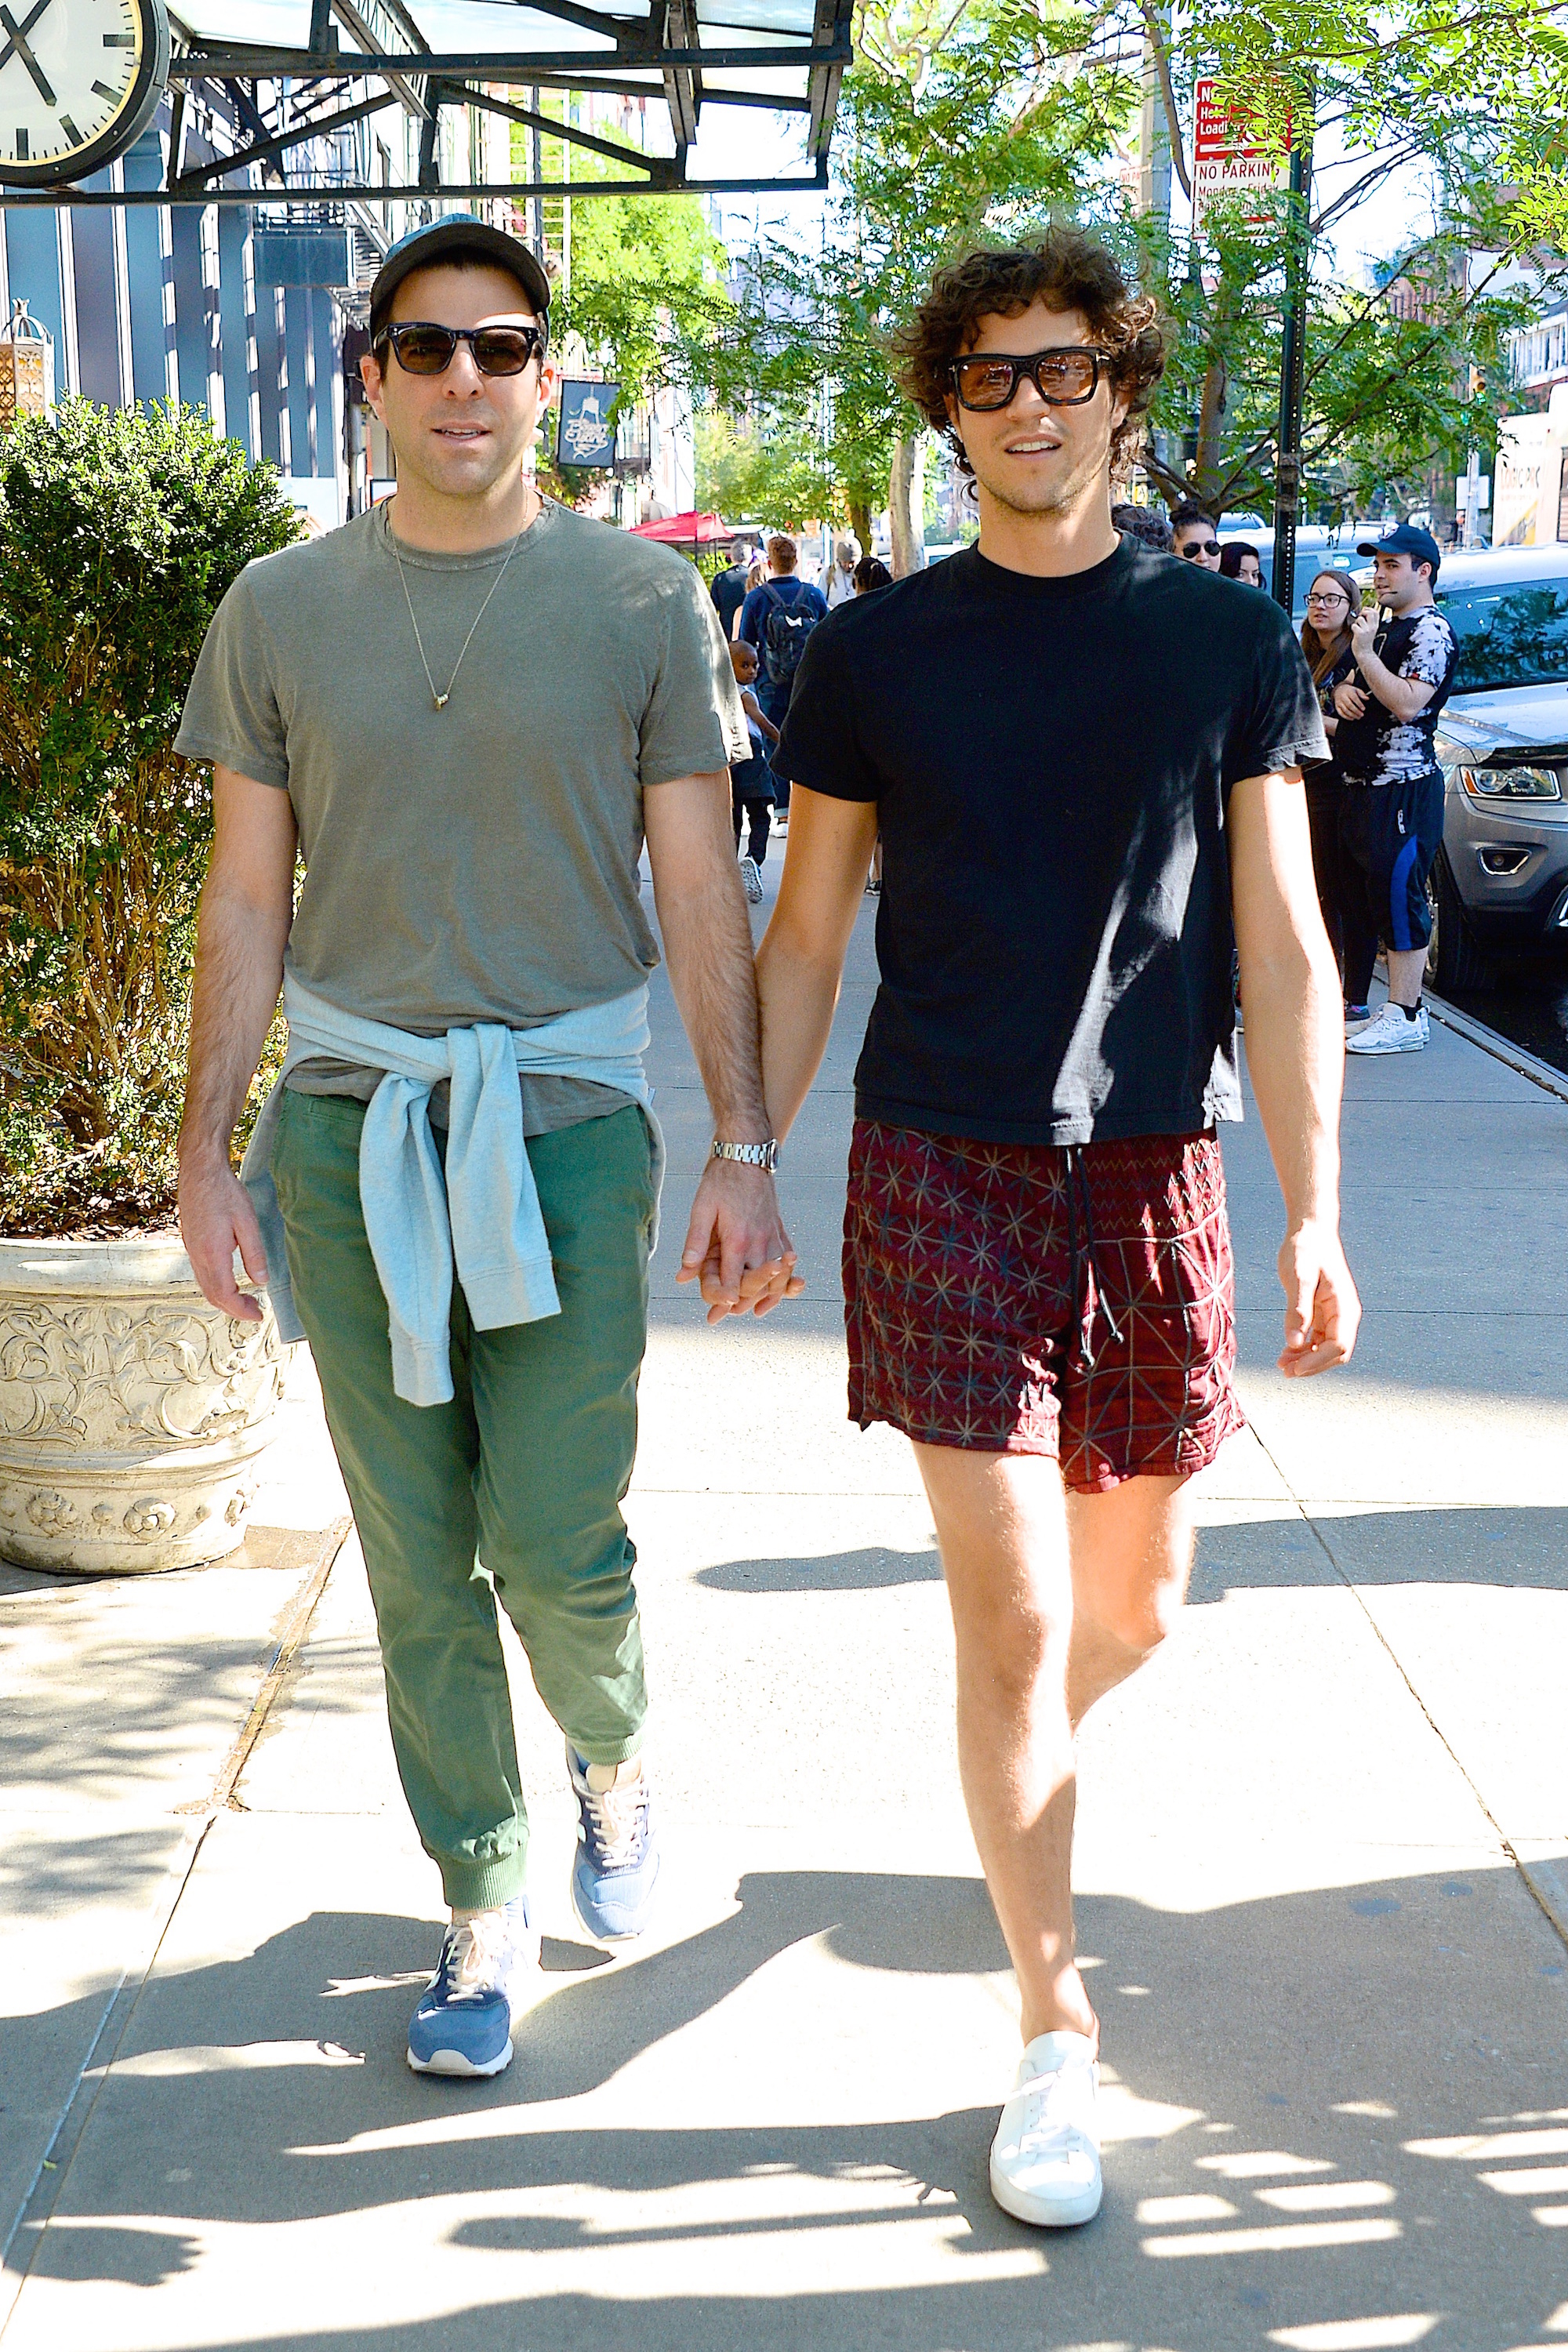 Miles and Zachary on the street holding hands